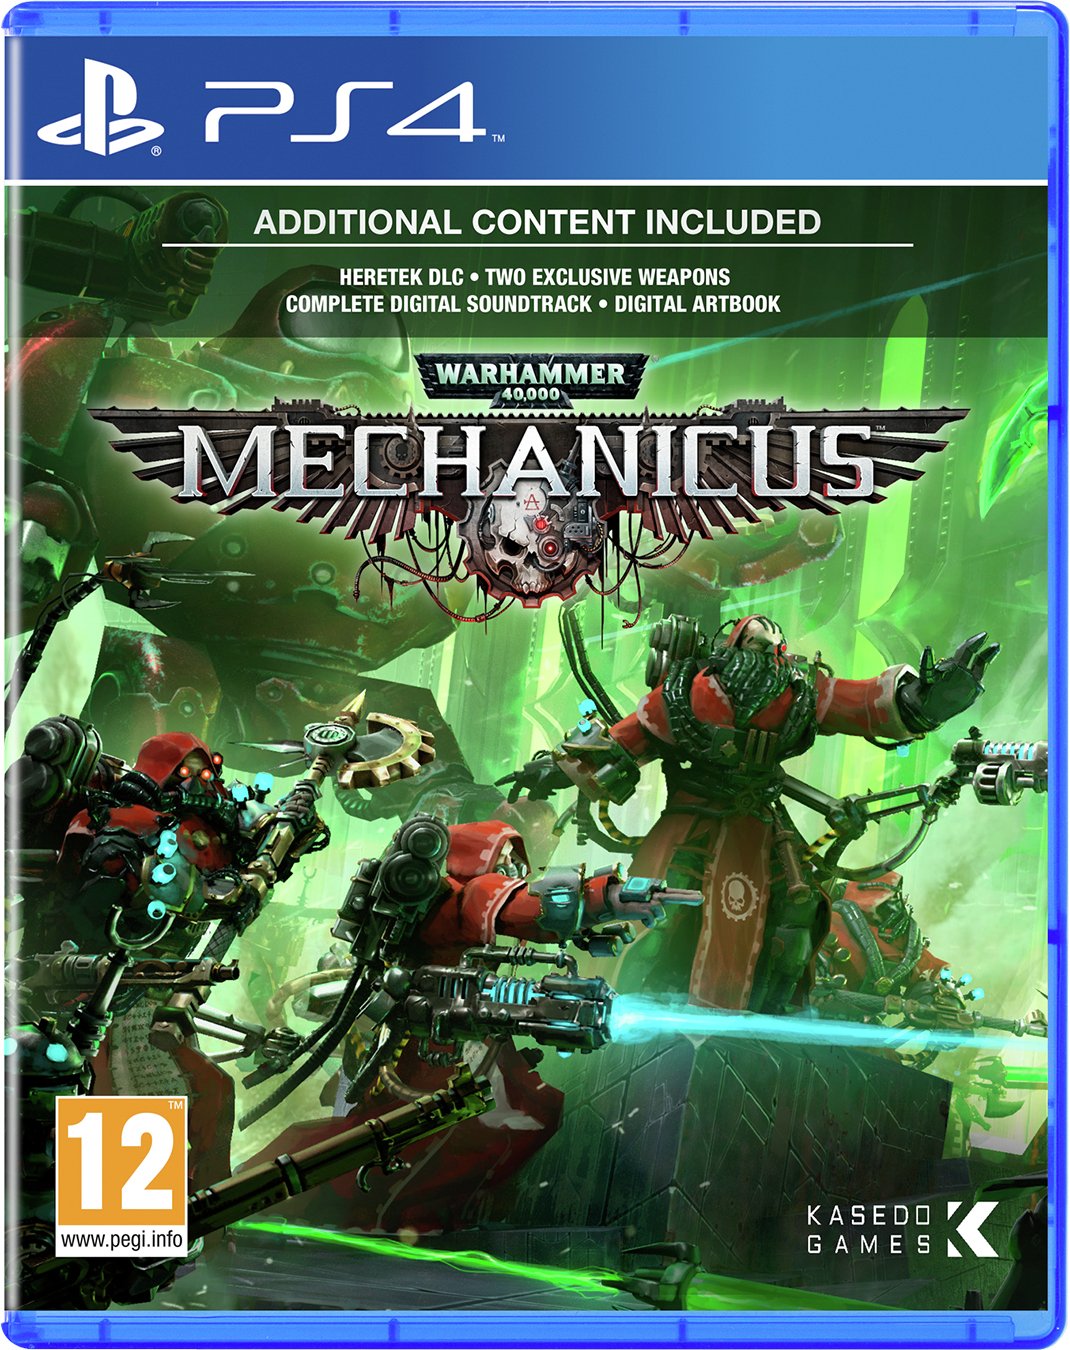 Warhammer 40,000: Mechanicus PS4 Game Review